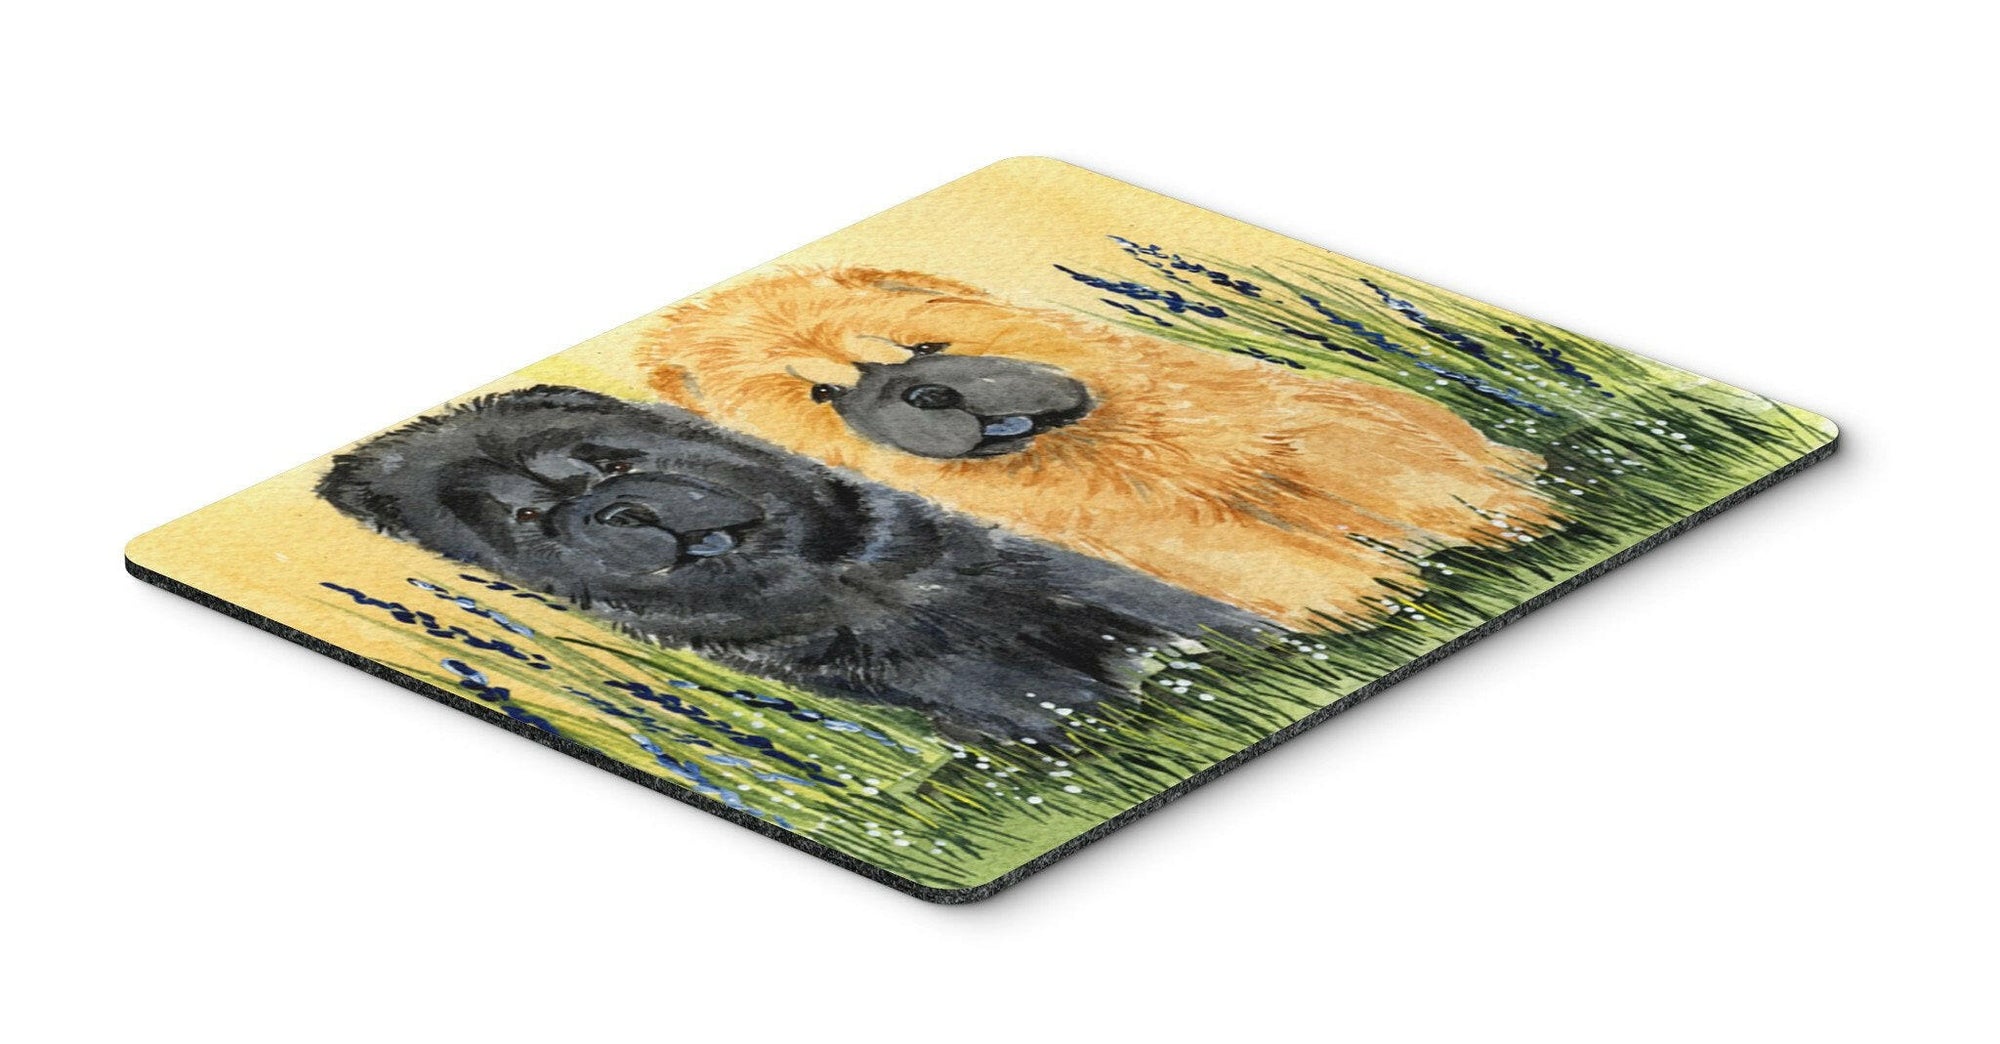 Chow Chow Mouse Pad / Hot Pad / Trivet by Caroline's Treasures